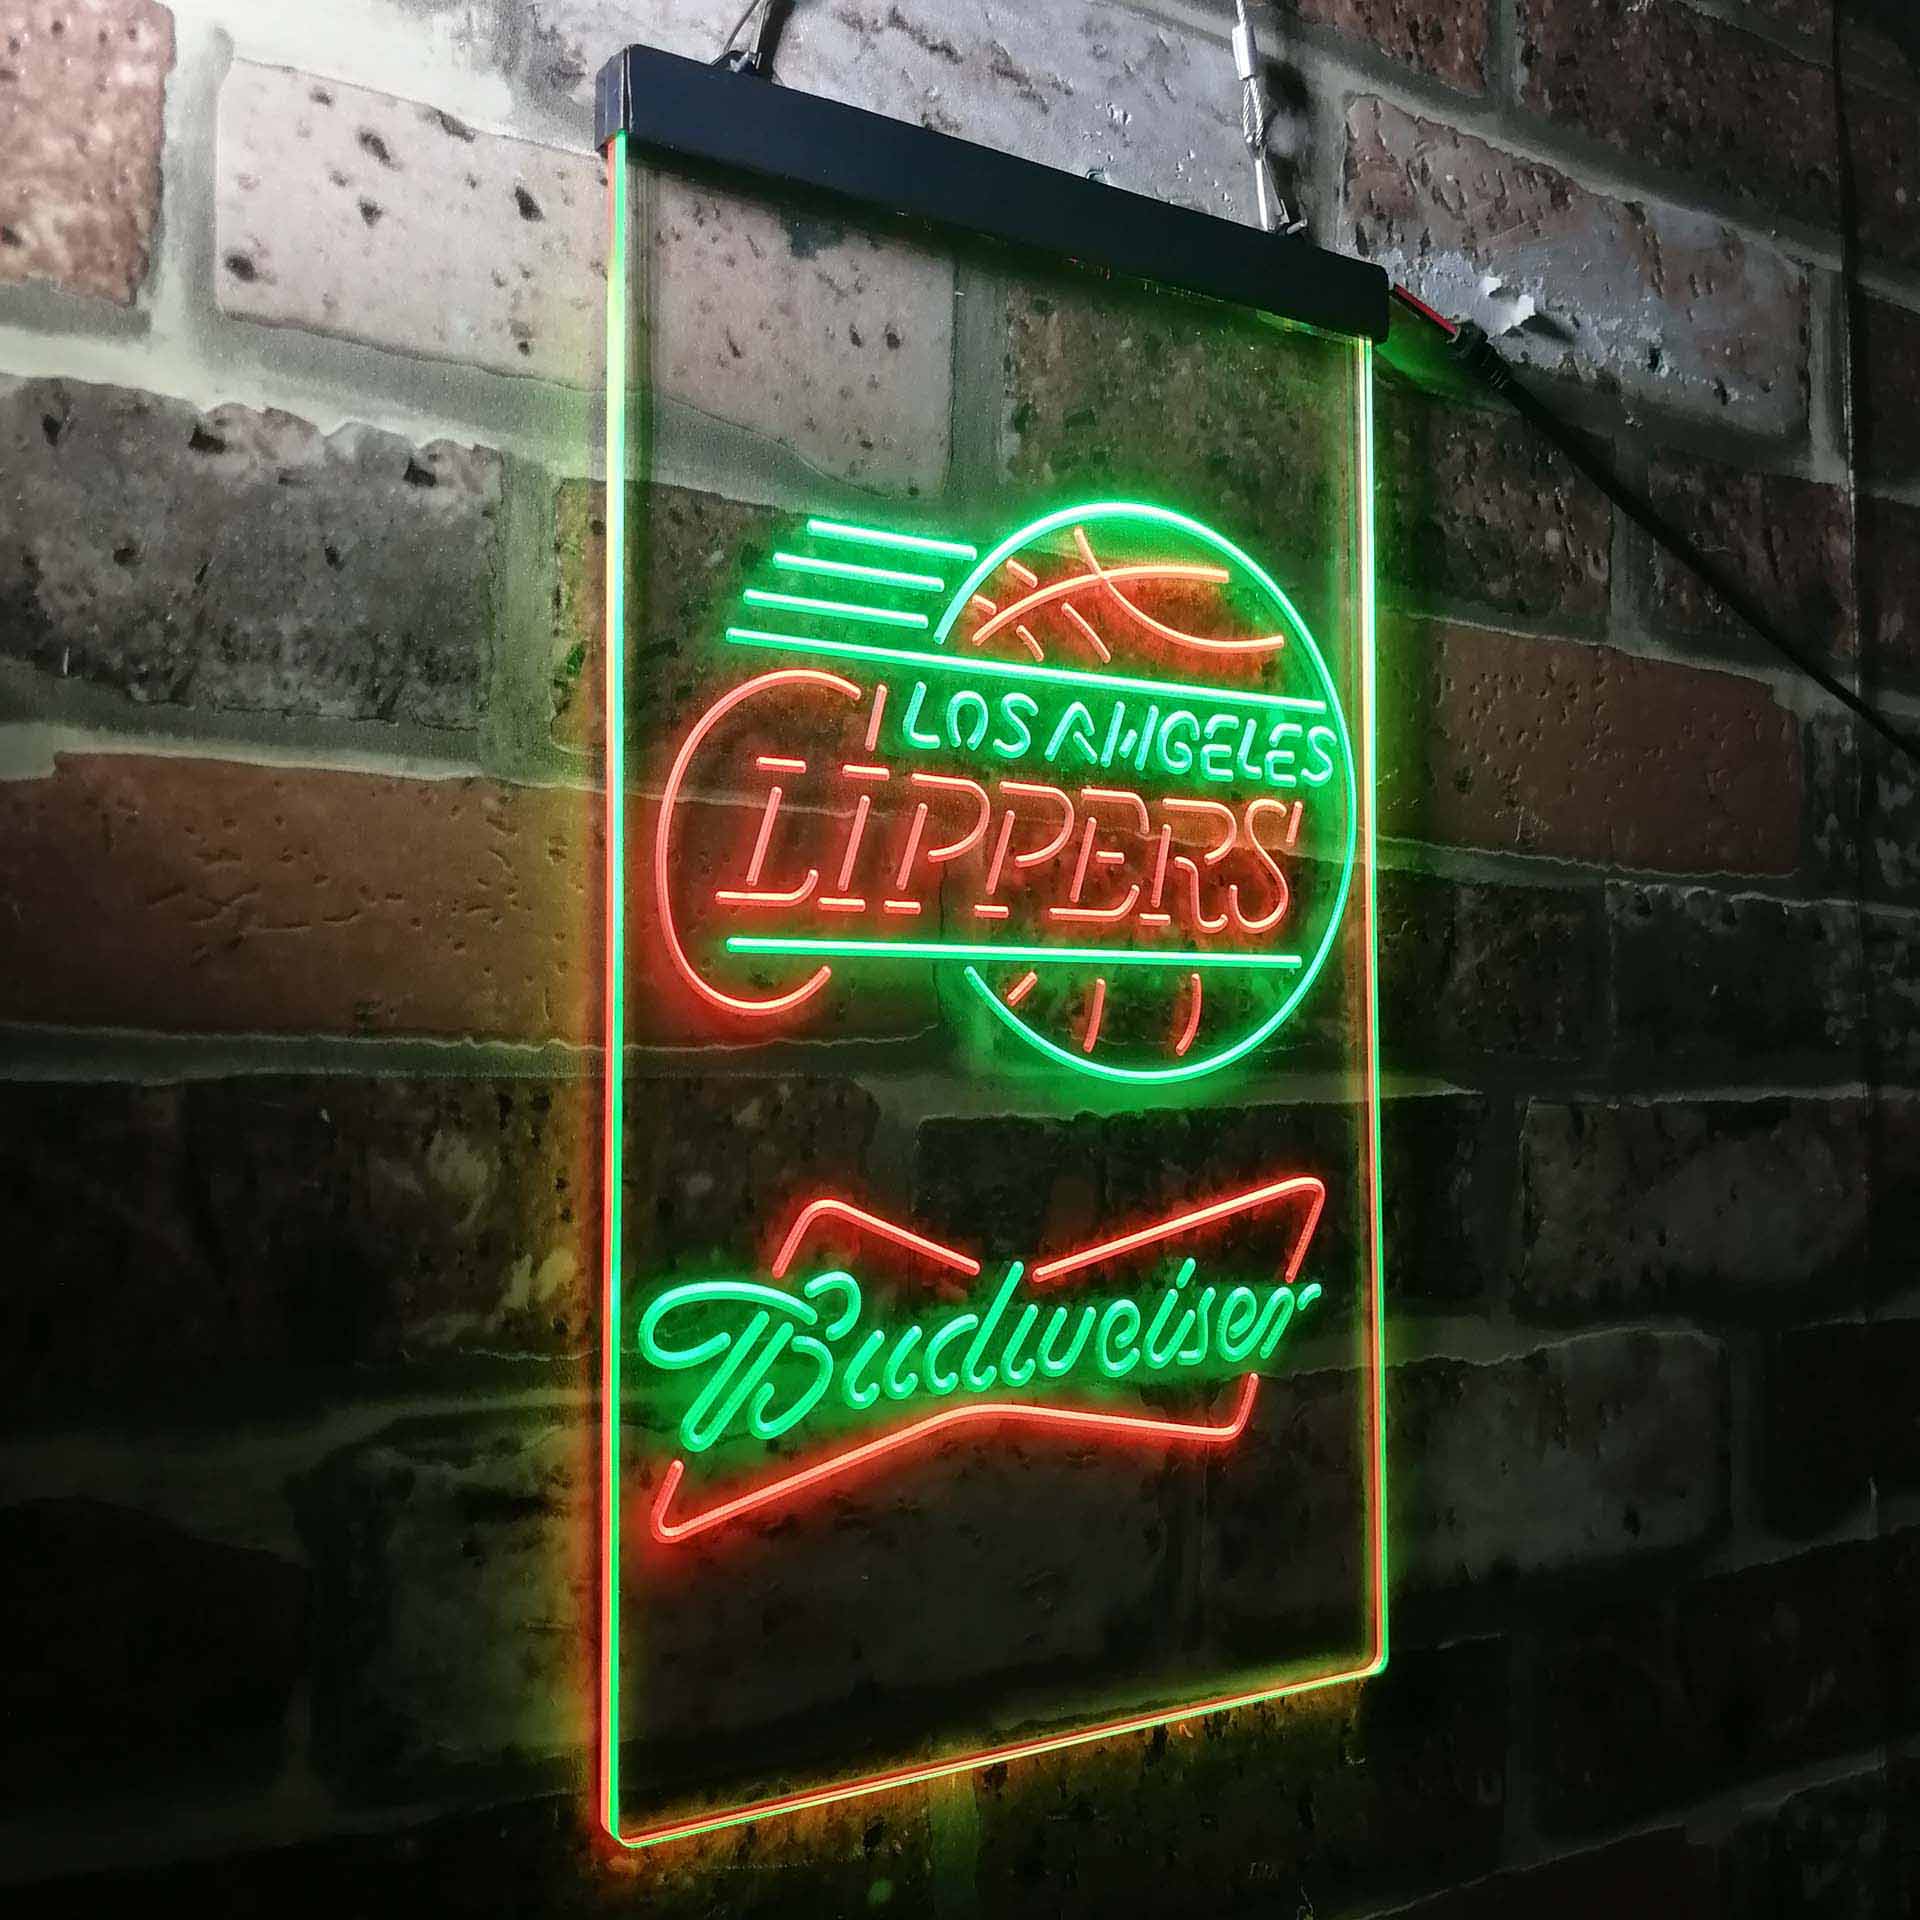 Los Angeles Clippers Budweiser Neon-Like LED Sign